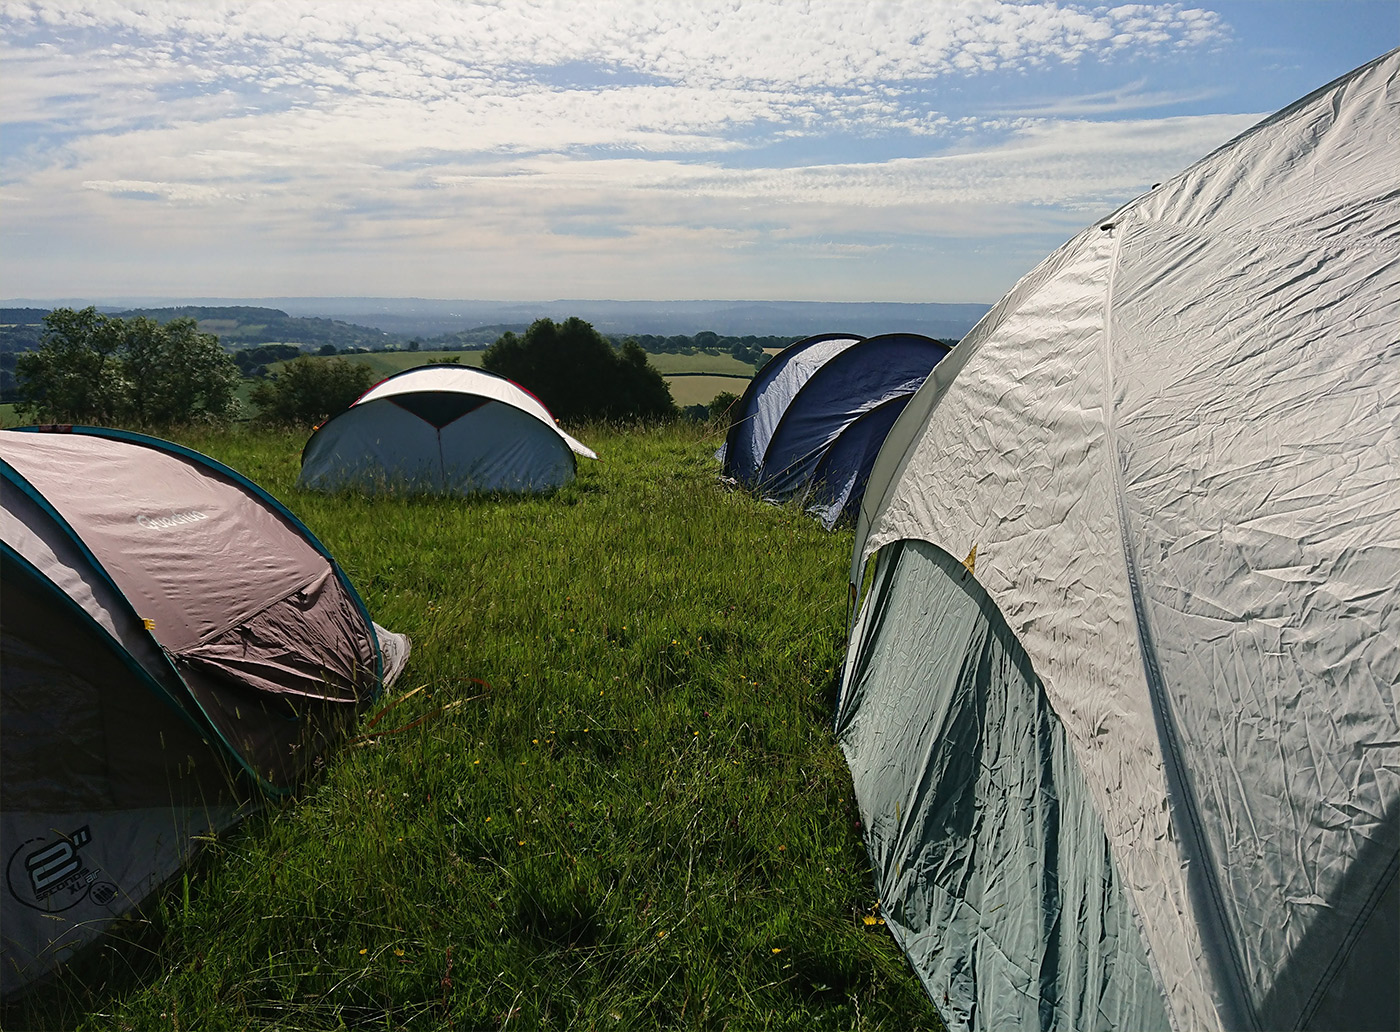 https://www.campingwithstyle.co.uk/wp-content/uploads/2018/06/camping-tents-shot.jpg